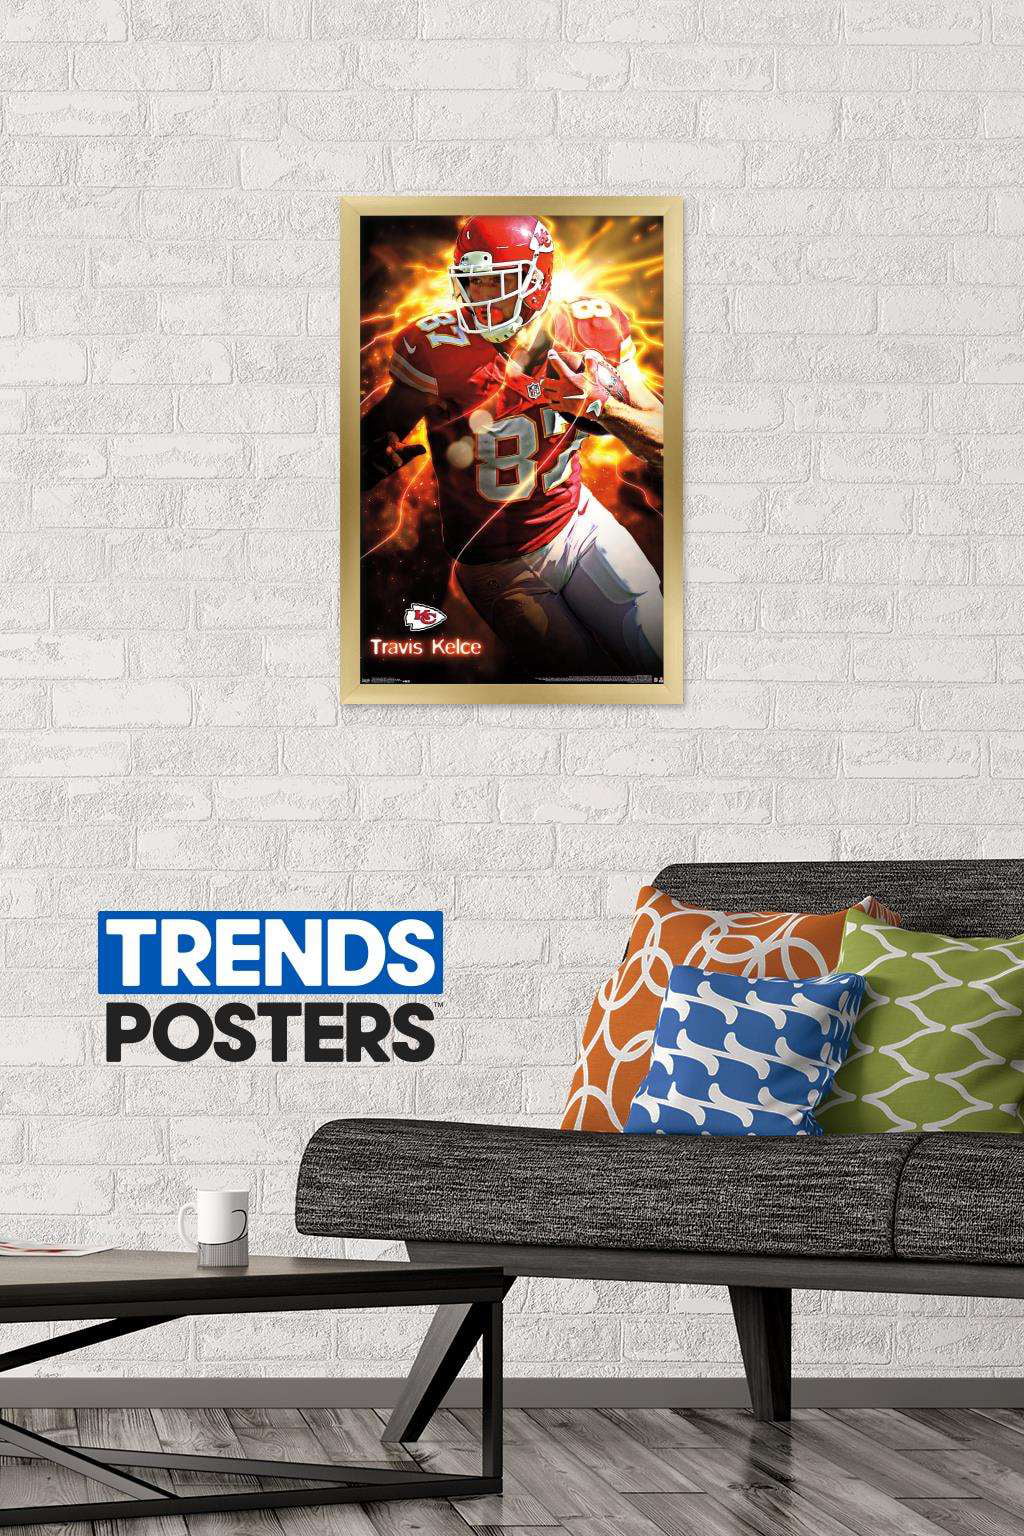 Travis Kelce And Patrick Mahomes Poster Prints For Wall Paper Posters Chief  Canvas Wall Decor Unframe-style 16x24inch(40x60cm)